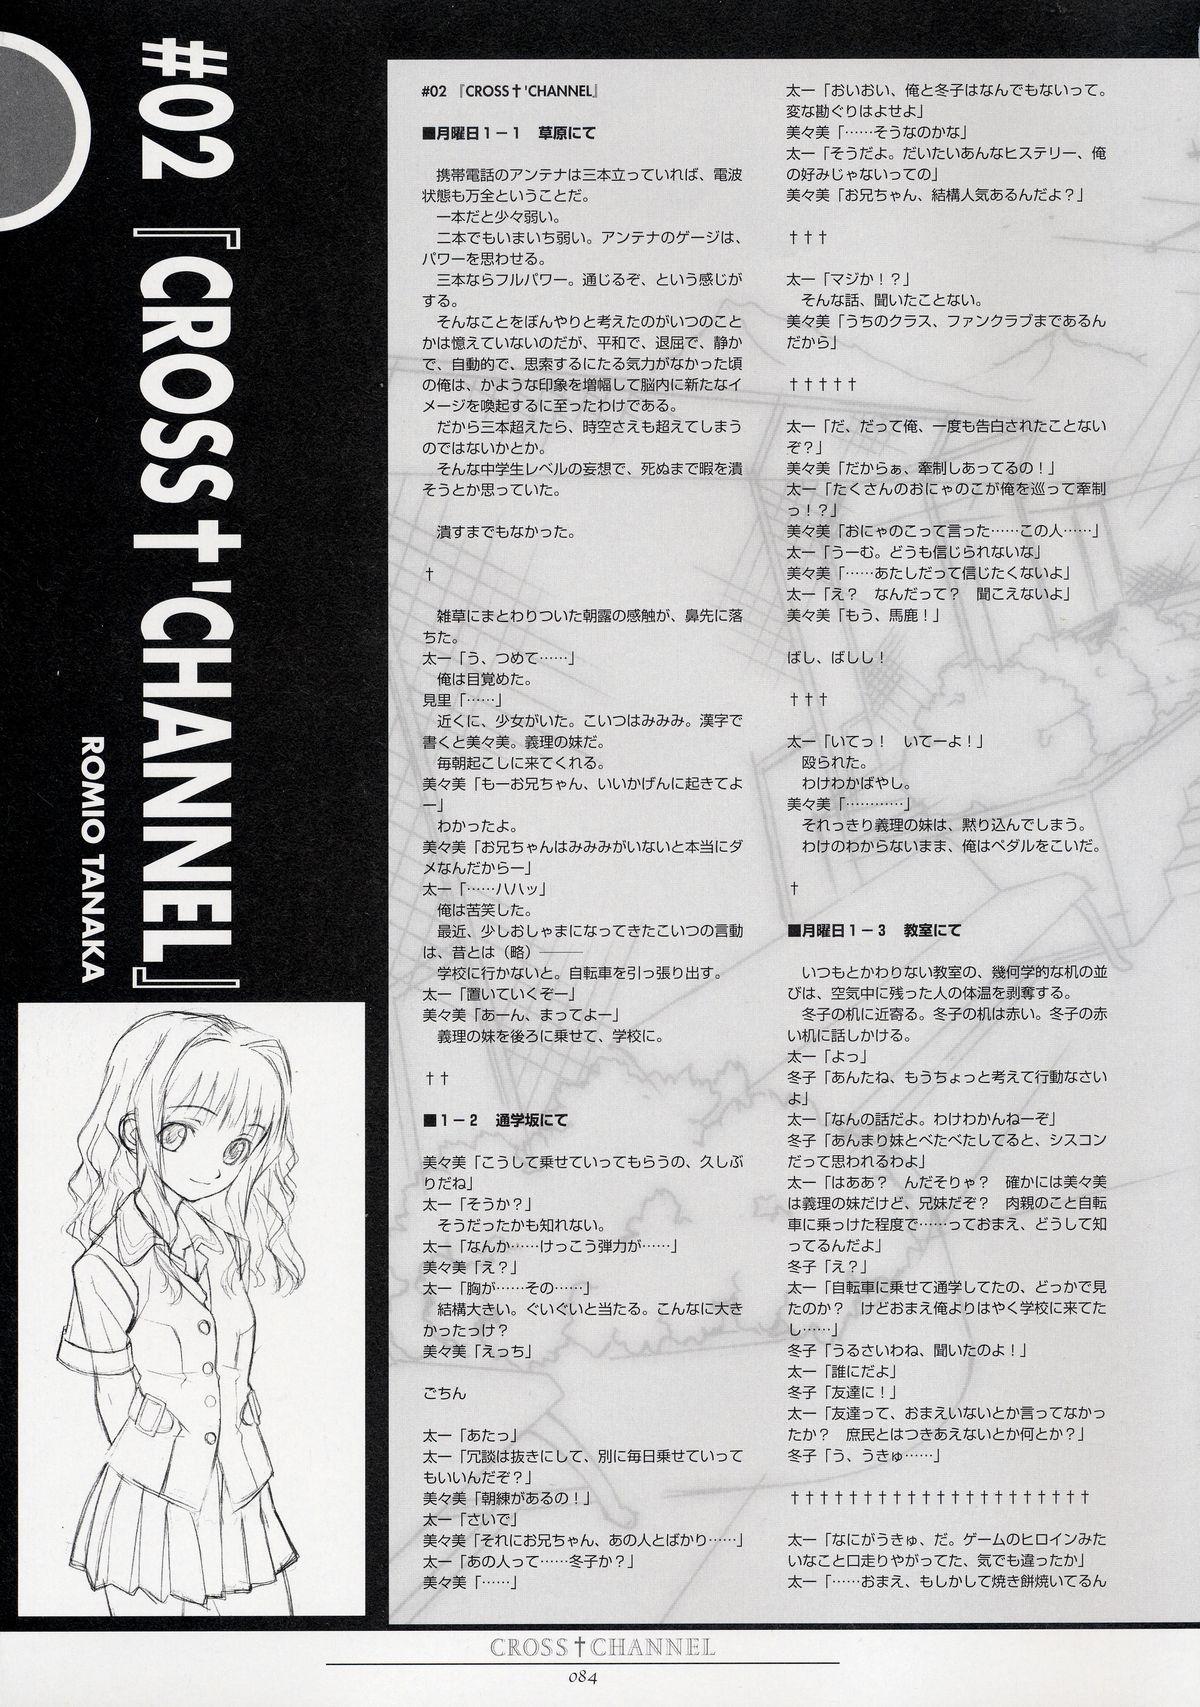 CROSS†CHANNEL Official Setting Materials 94